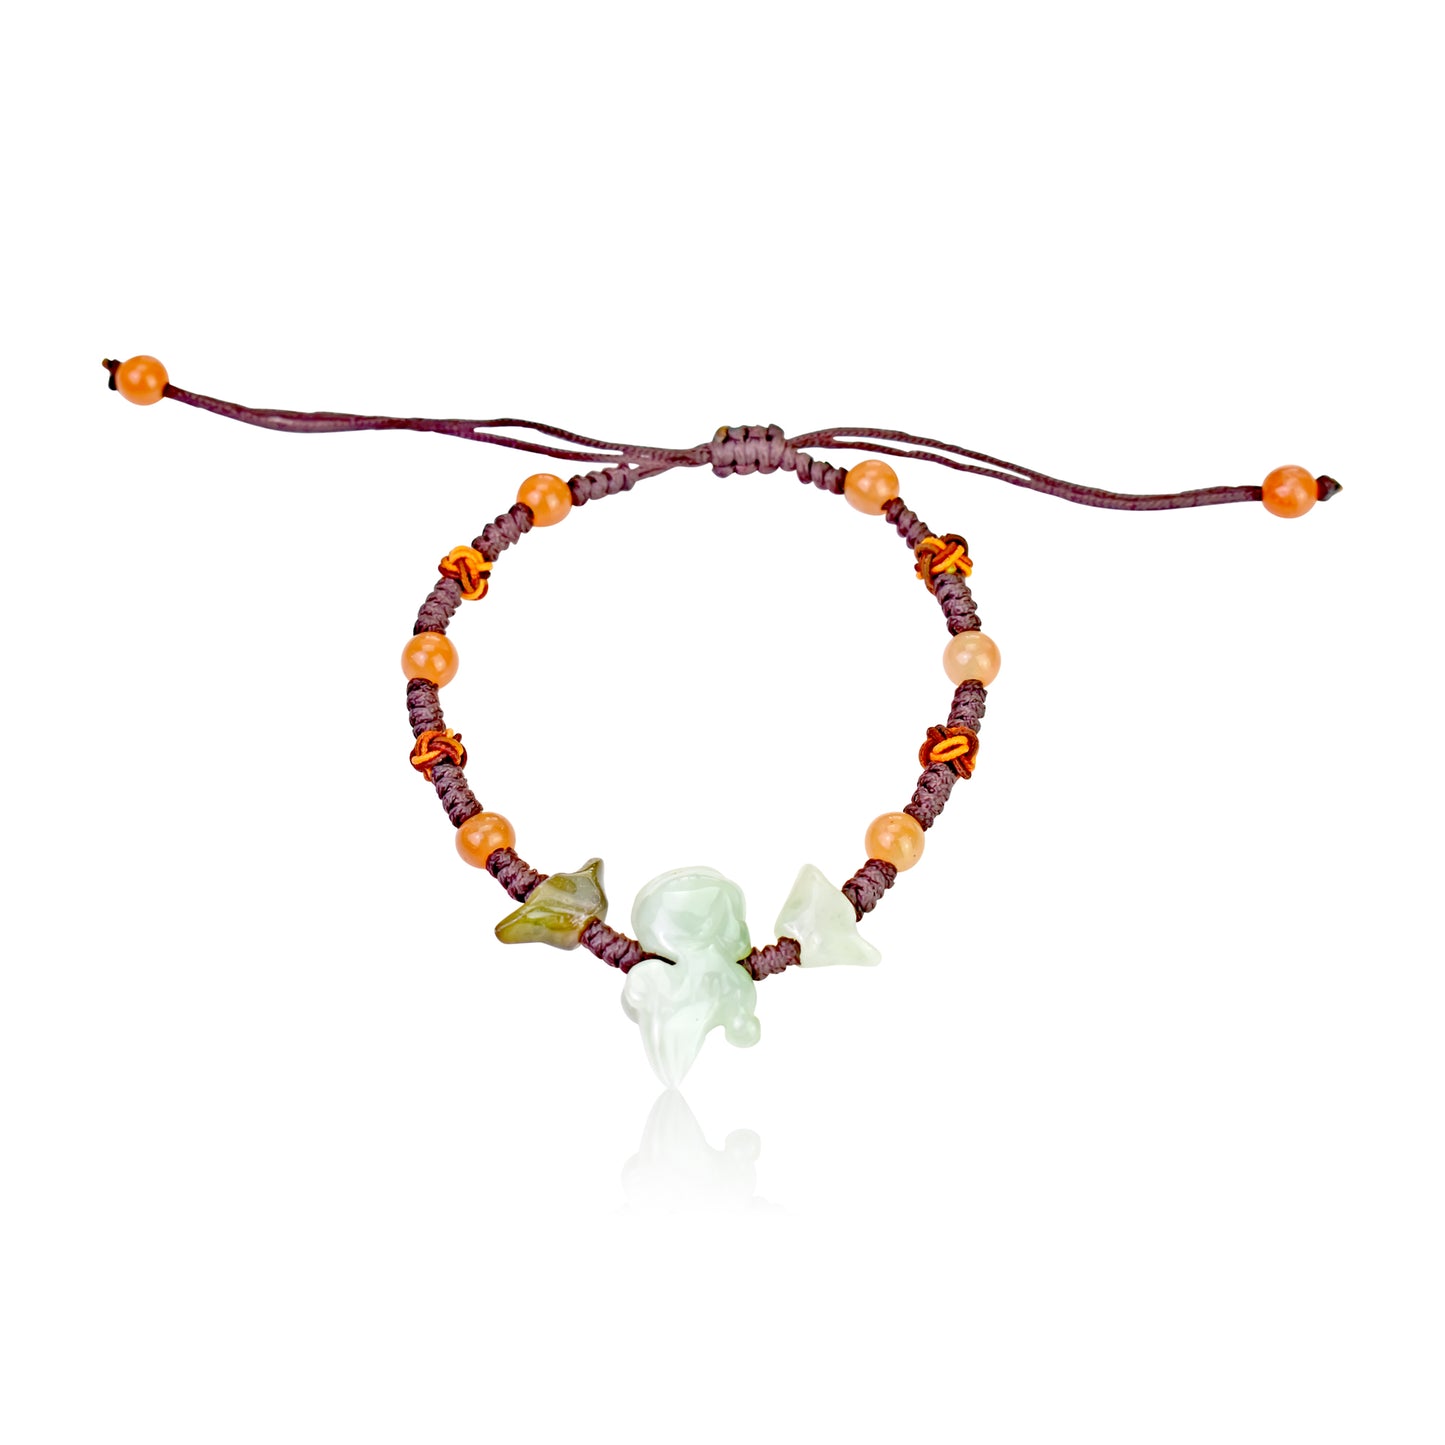 Become Ambitious with a Rat Symbolized Jade Bracelet made with Brown Cord